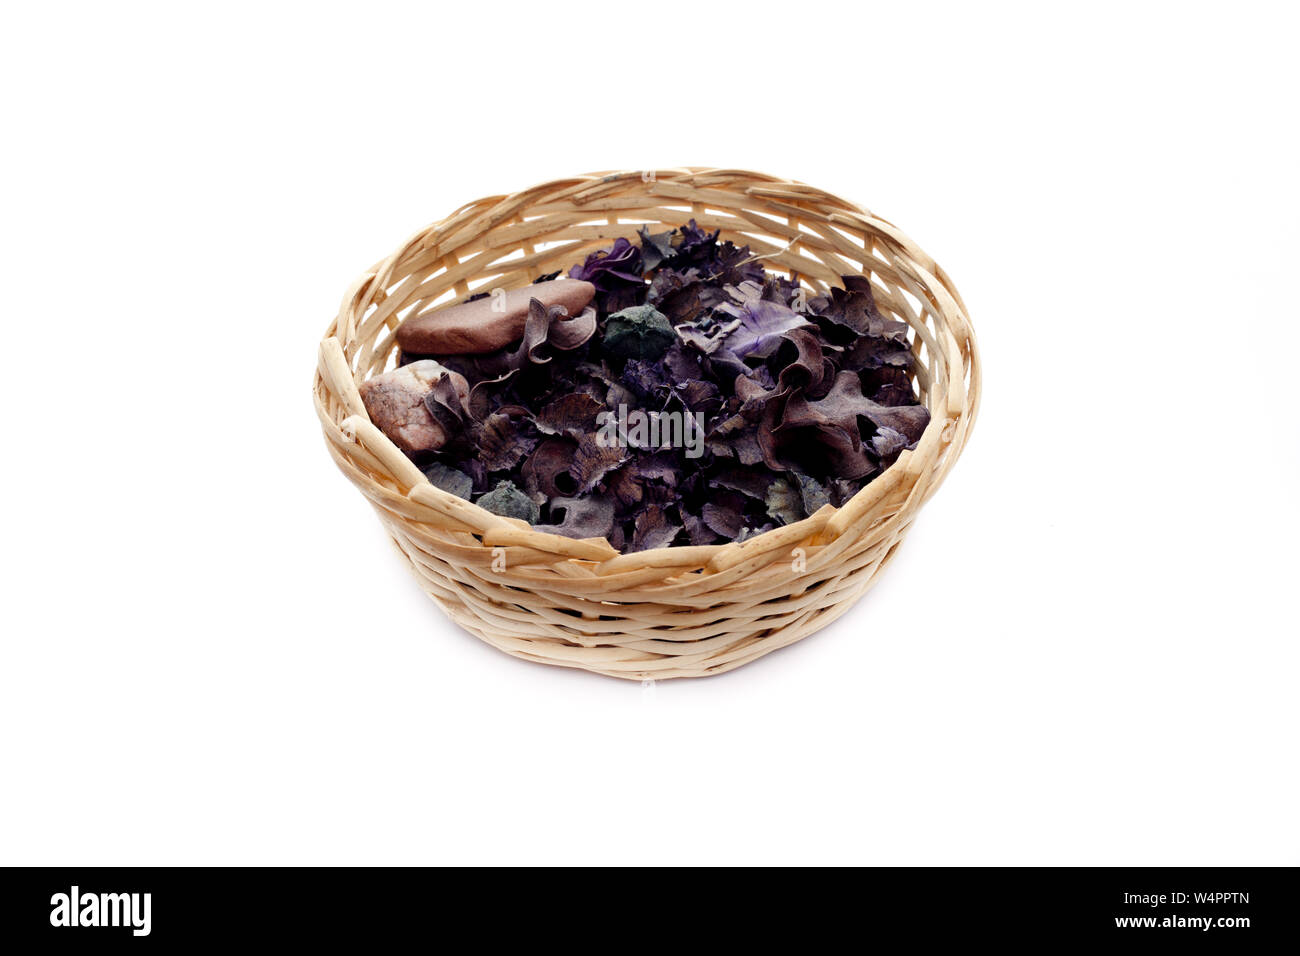 Dried flowers in a wicker basket on white Stock Photo